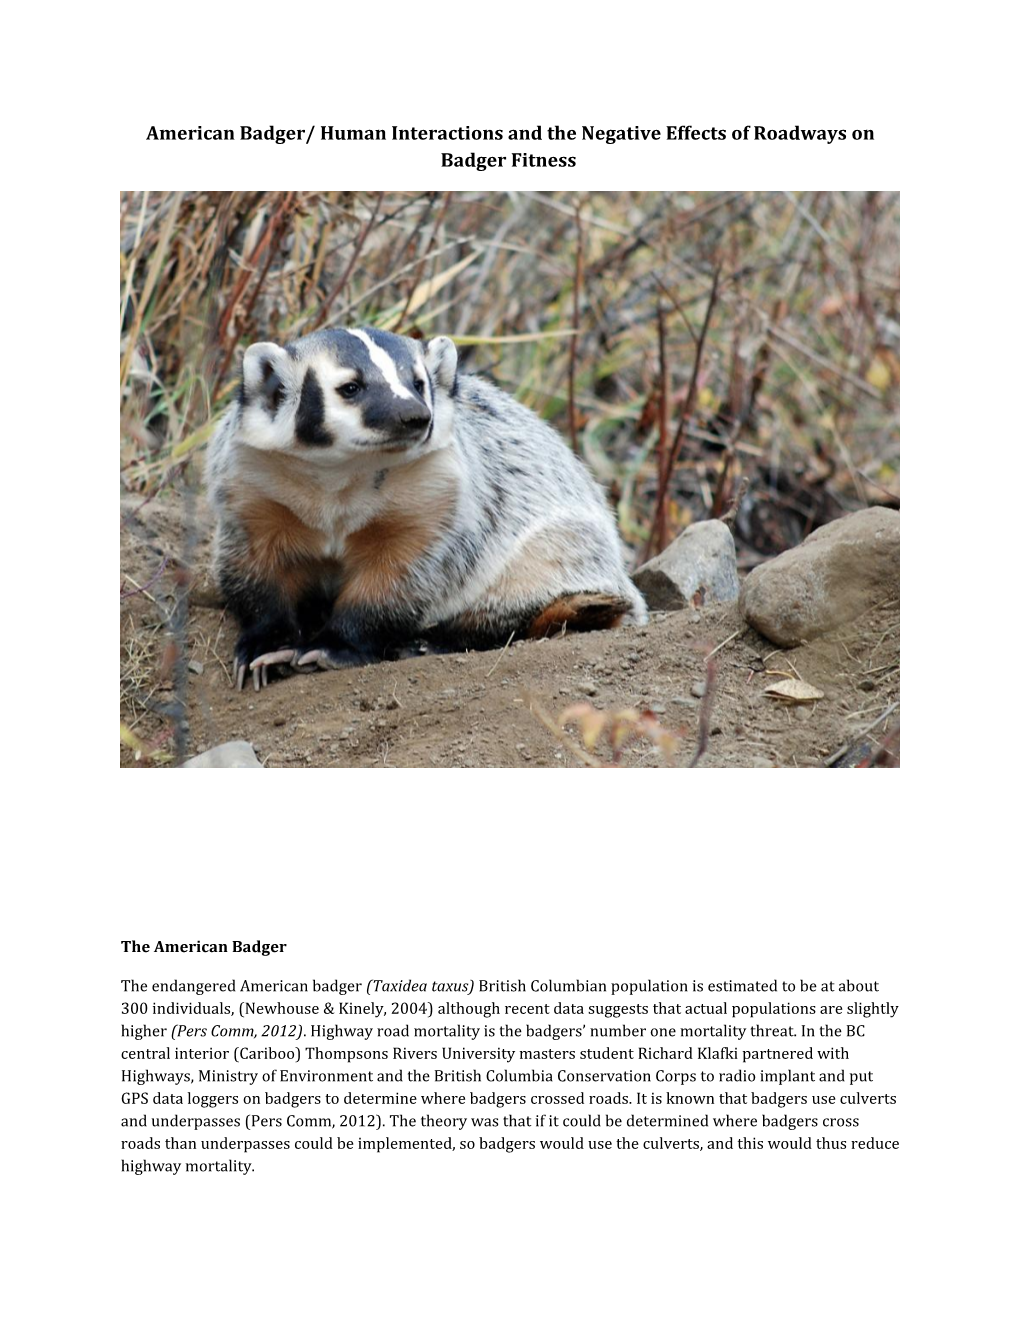 American Badger/ Human Interactionsand the Negative Effects of Roadways on Badger Fitness